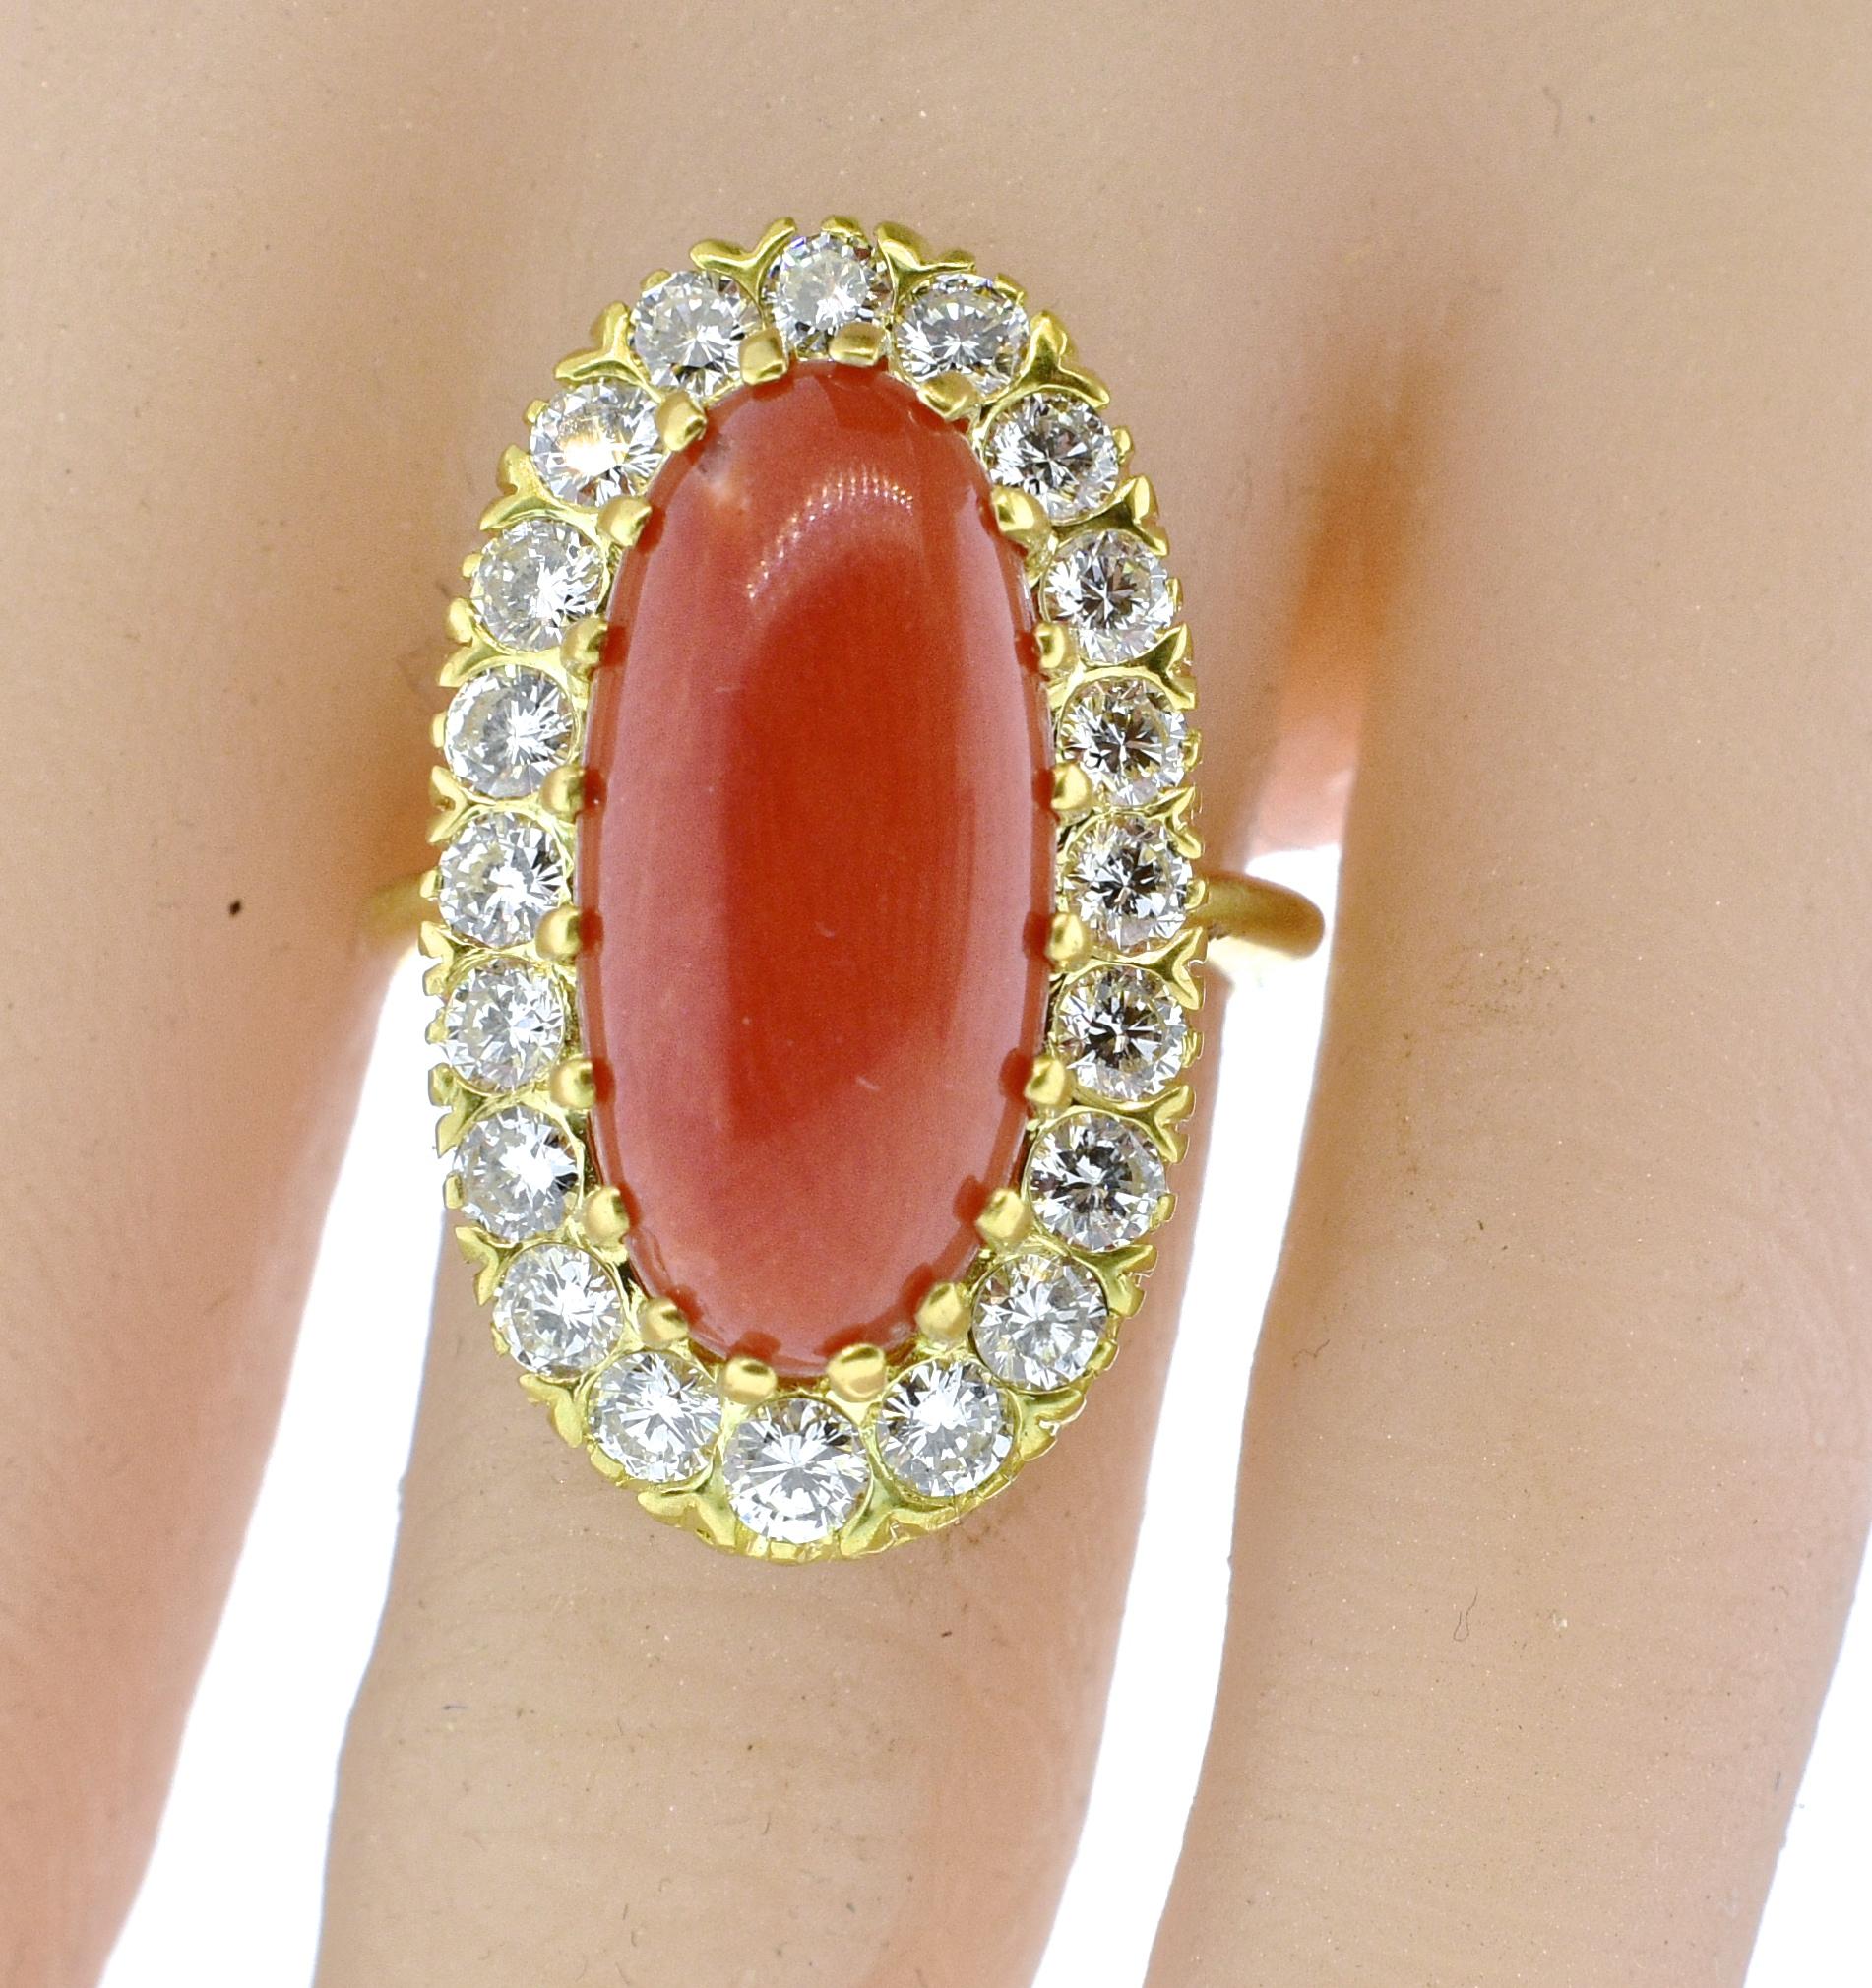 Red coral from the Mediterranean is surrounded with fine white brilliant cut diamonds all hand set in 18K.  The natural coral in a very pleasing shape, weighs approximately 6 cts and is surrounded by 1.85 cts of fine white brilliant cut diamonds. 